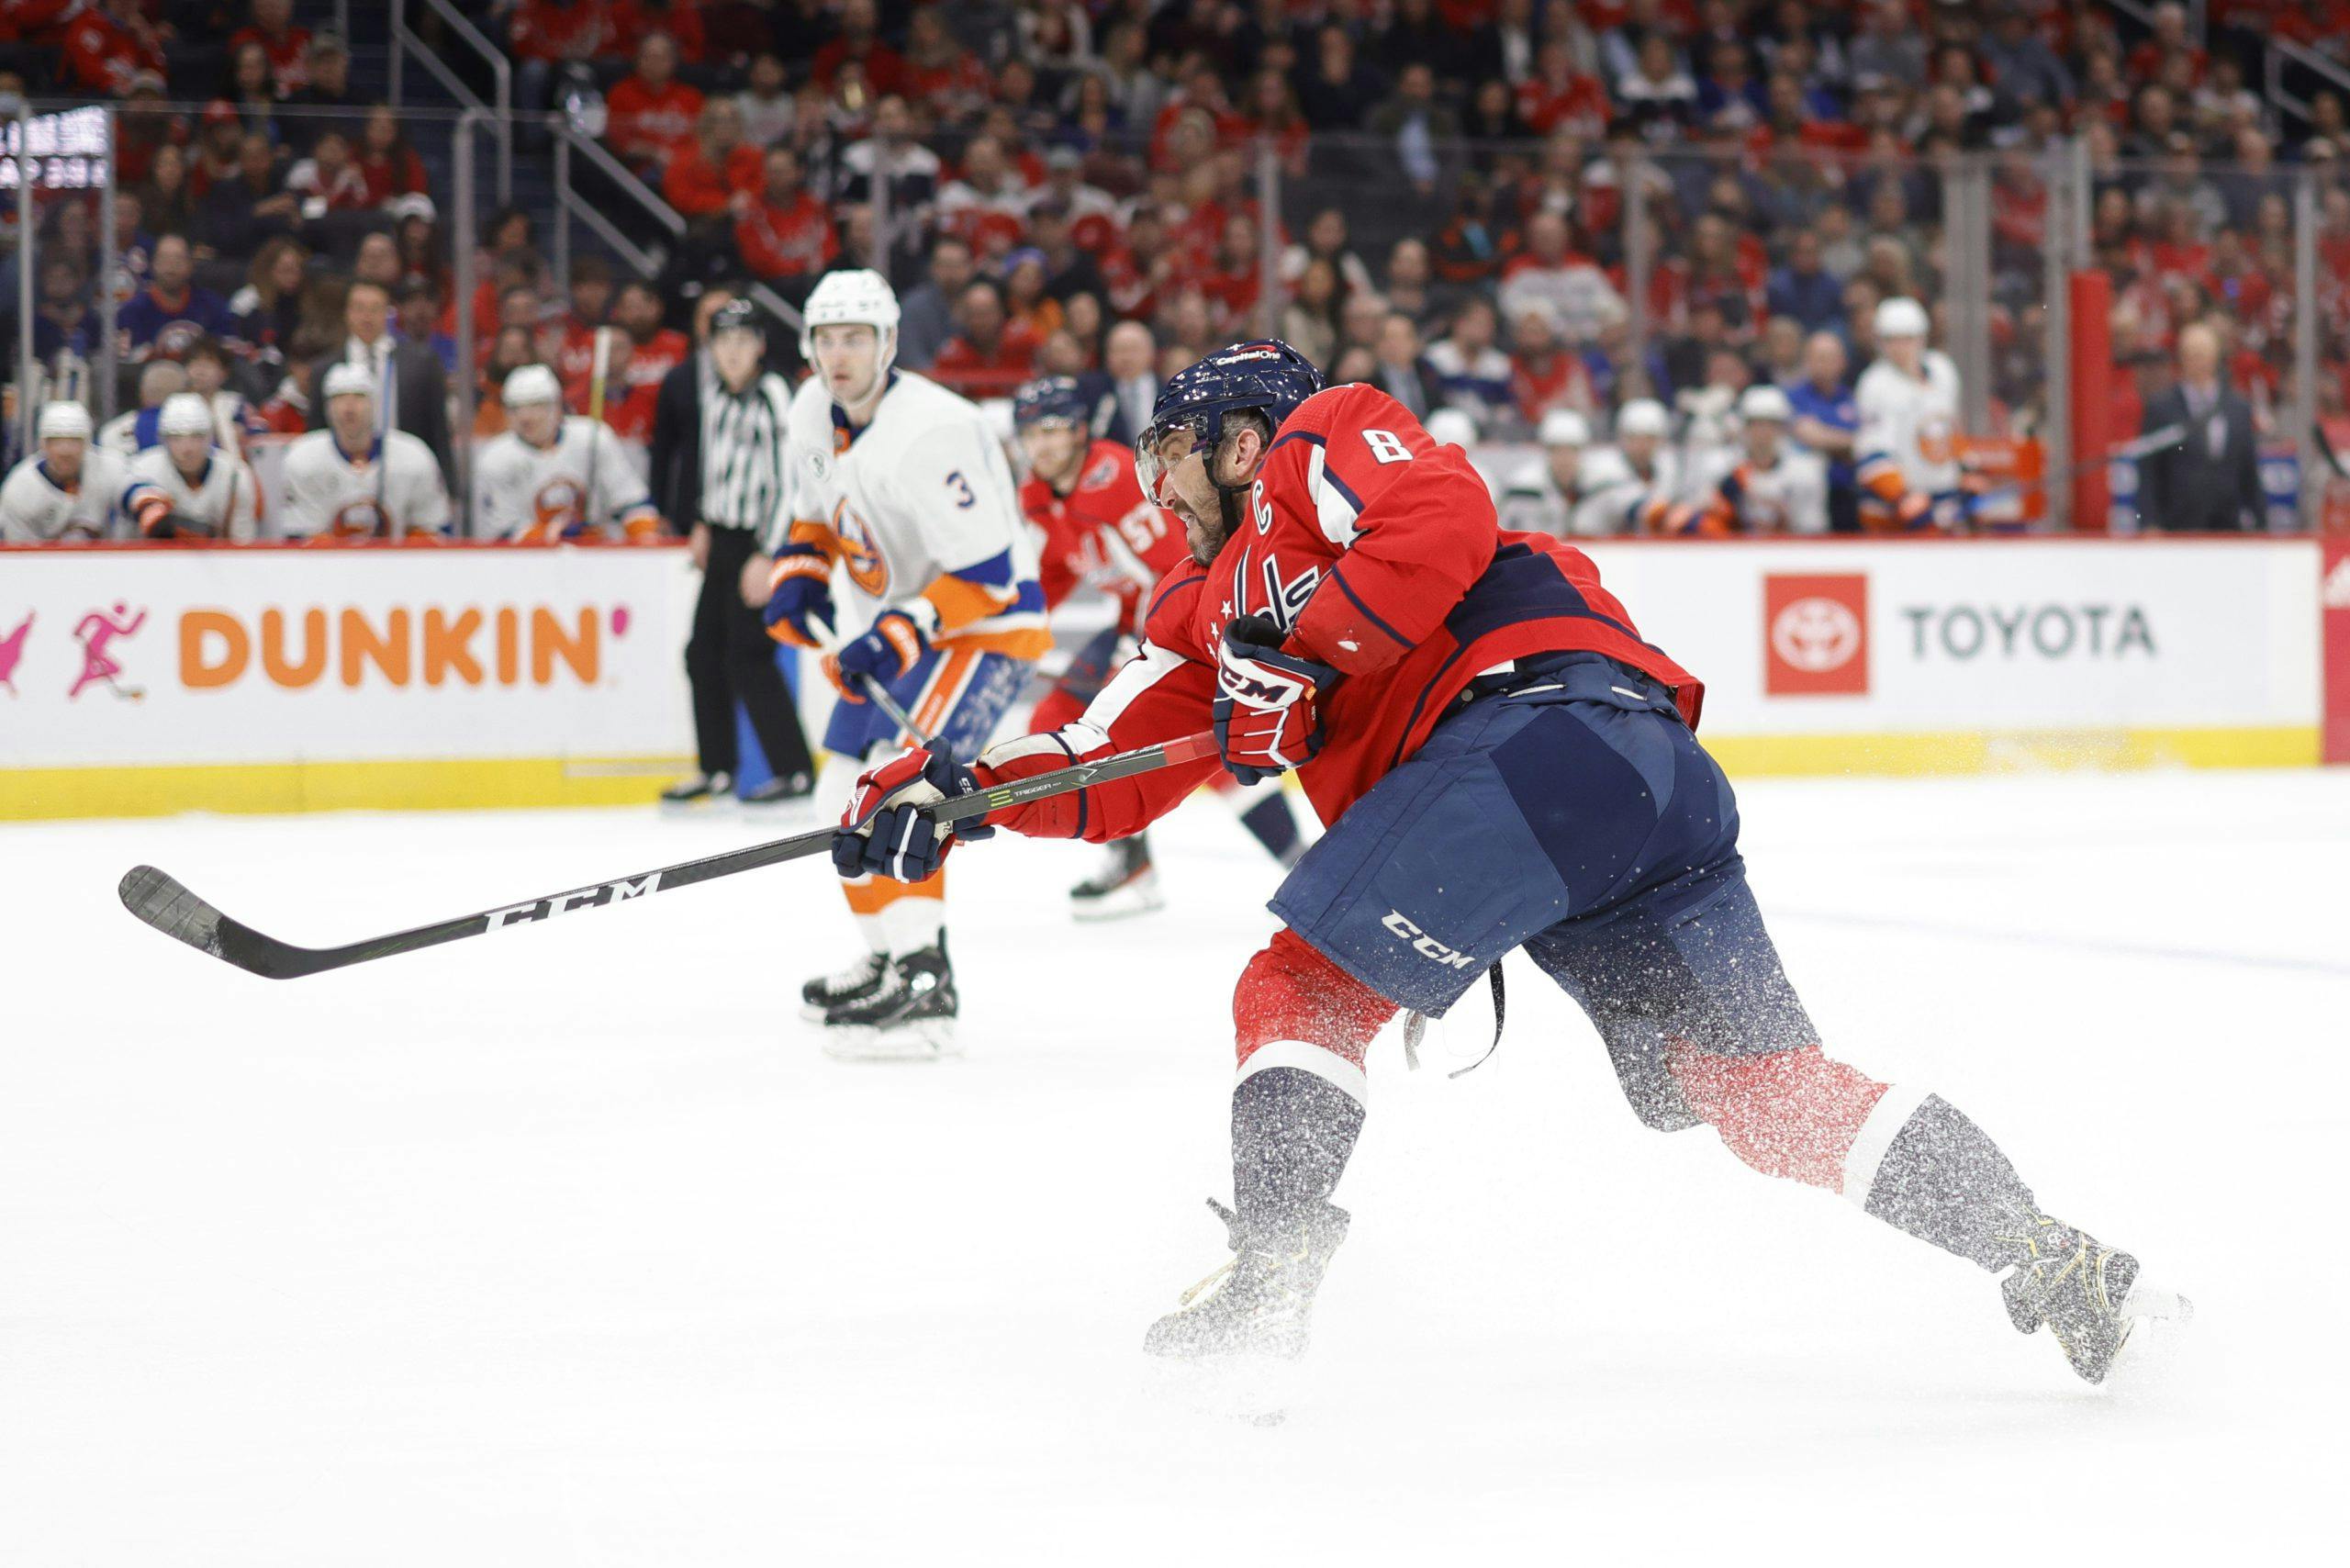 Ovechkin won't play for any NHL team other than Capitals